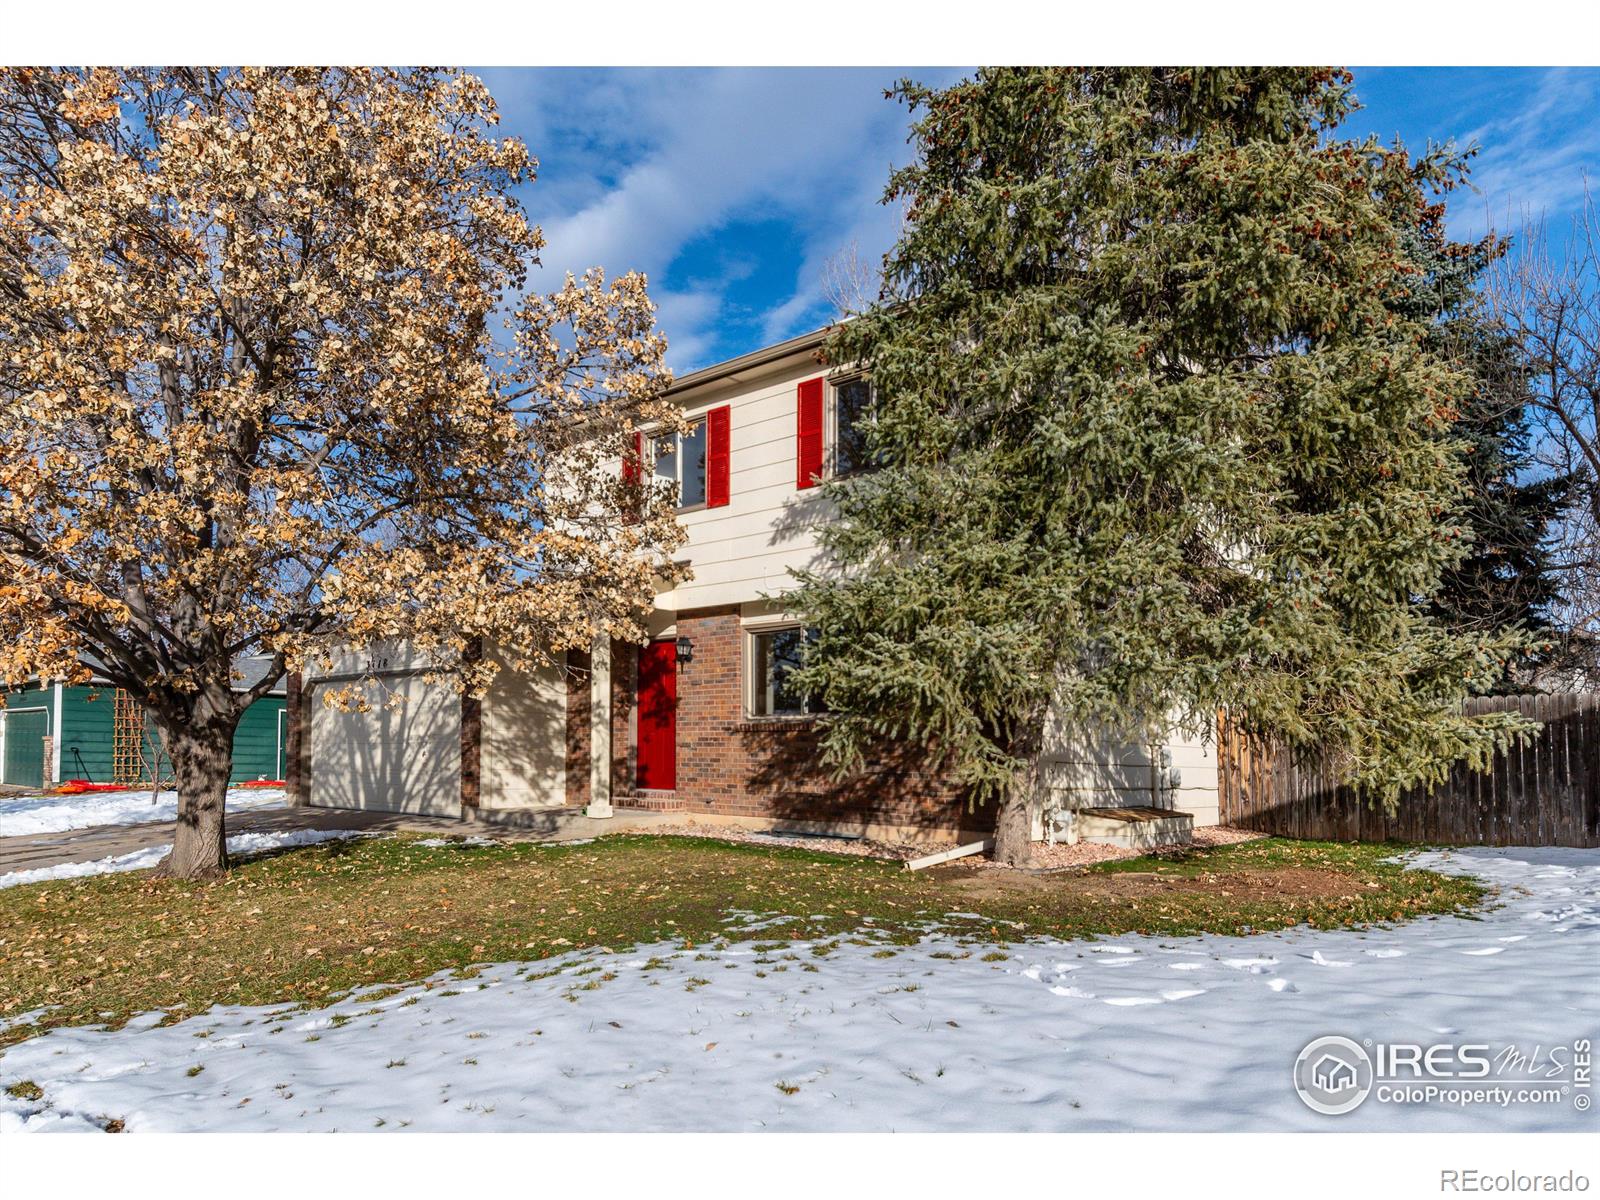 CMA Image for 3118  Boone Street,Fort Collins, Colorado